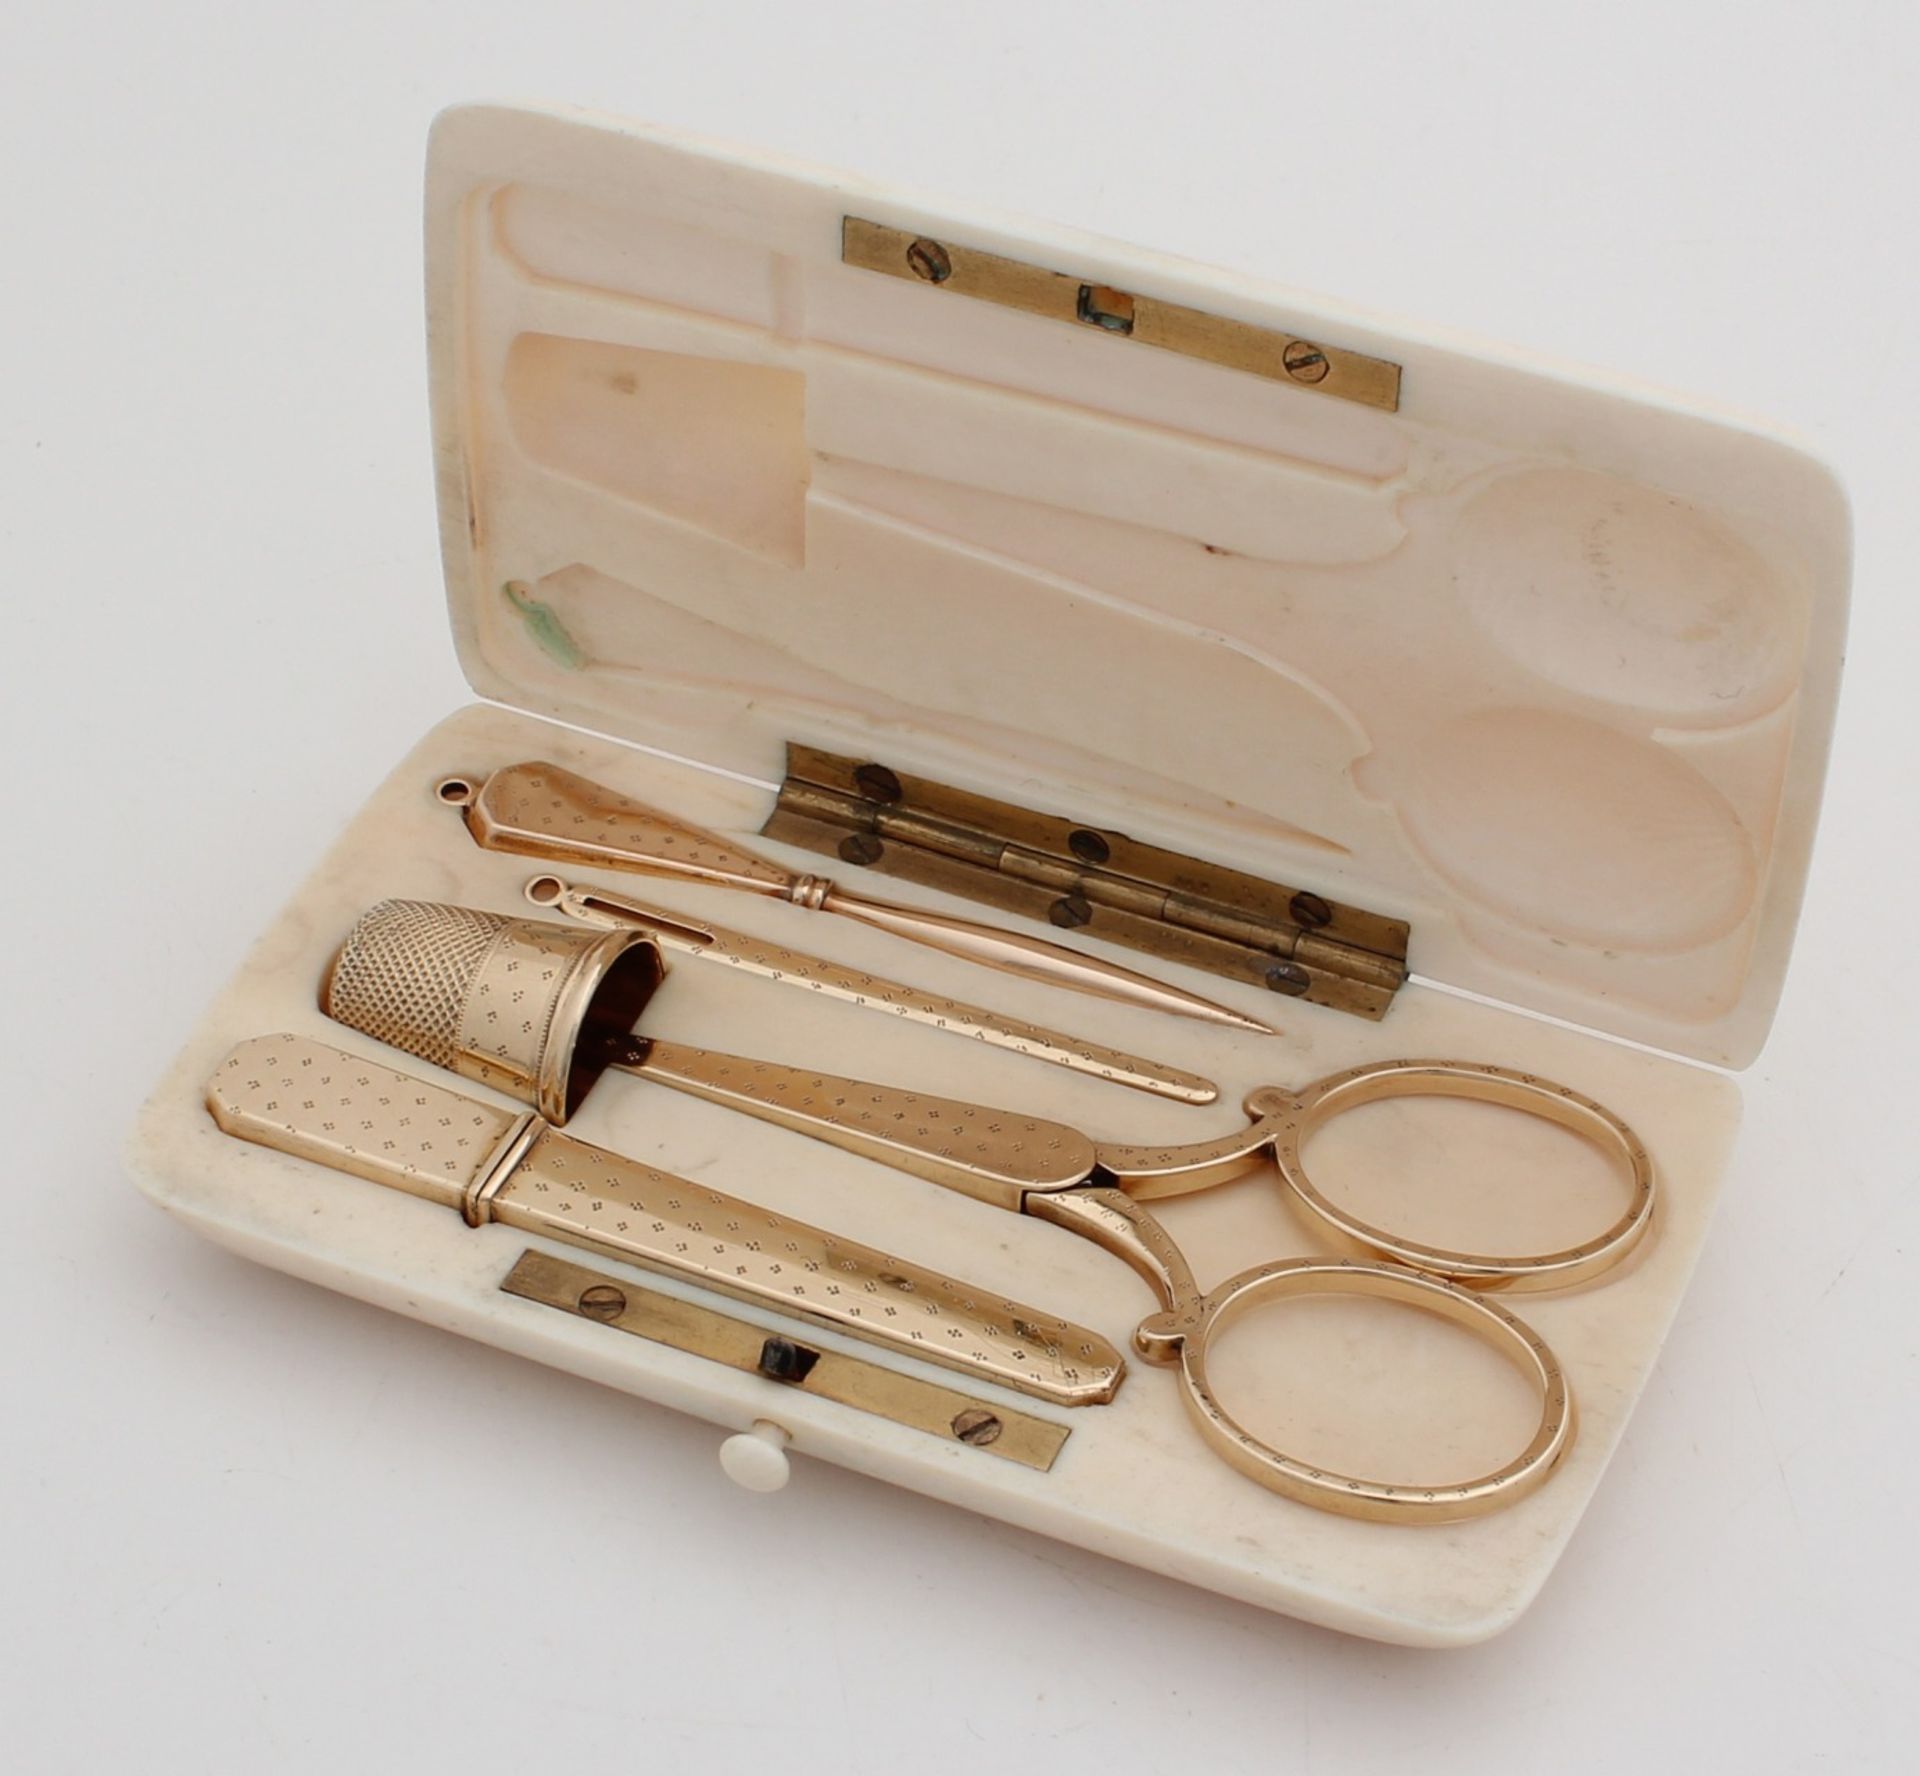 Six-piece gold sewing kit, 585/000, consisting of a sheath with scissors, awl, broach, thimble and